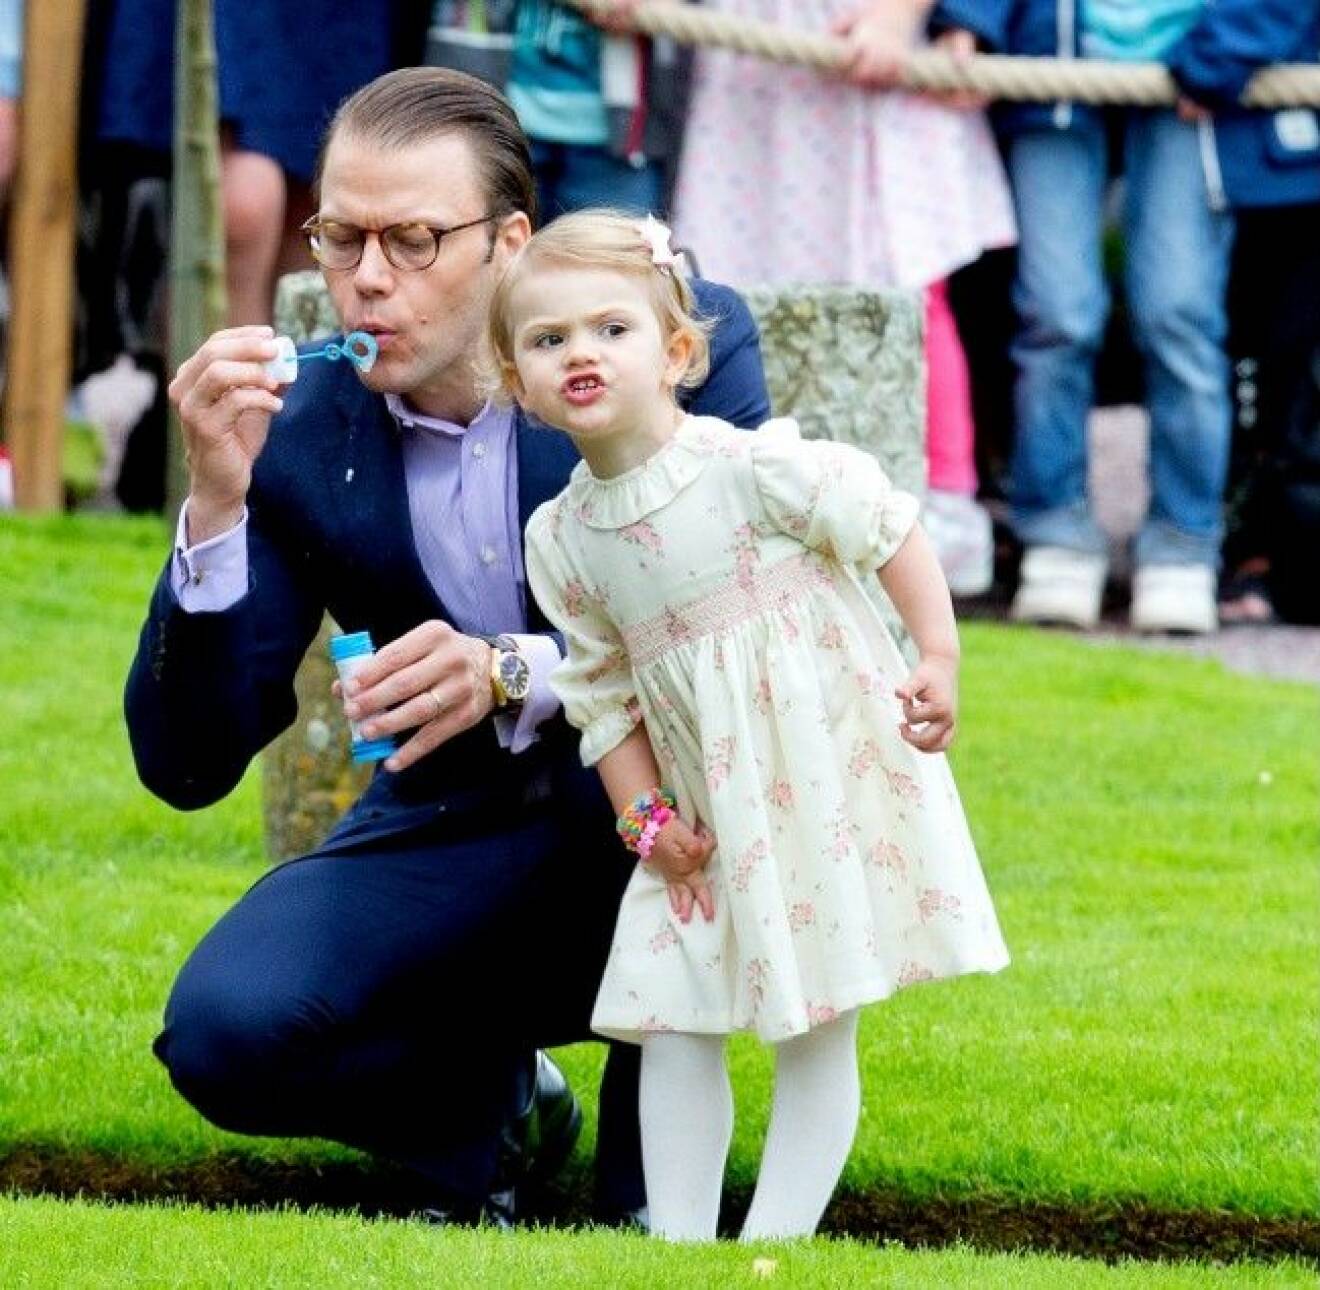 Crown princessVictoria and Prince Daniel of Sweden at the 37th birthday celebration of Crown princessVictoria at Solliden Palace, Sweden, 14 July 2014. Photo: Patrick van Katwijk / NETHERLANDS AND FRANCE; OUT /dpa -NO WIRE SERVICE- (c) DPA / IBL Bildbyrå